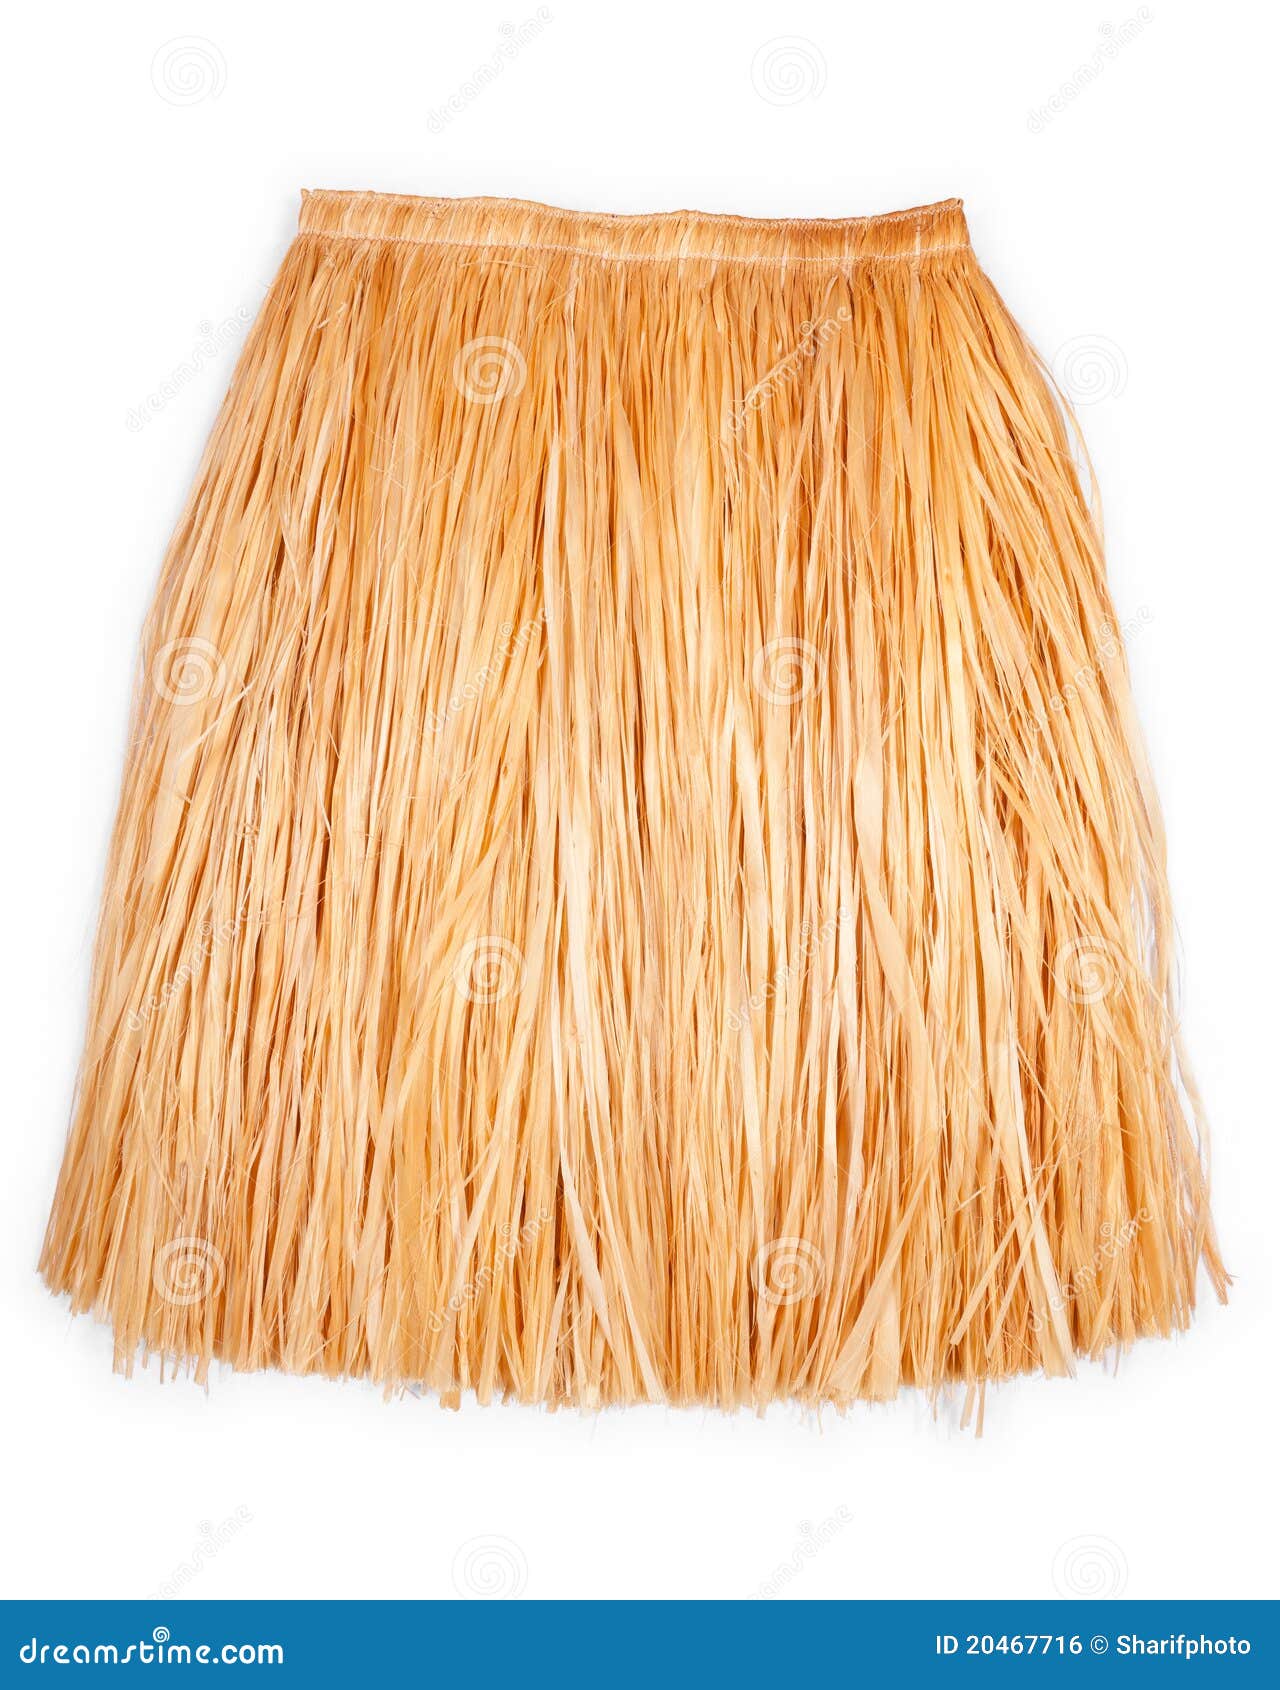 grass skirt pictures clip art free - photo #14